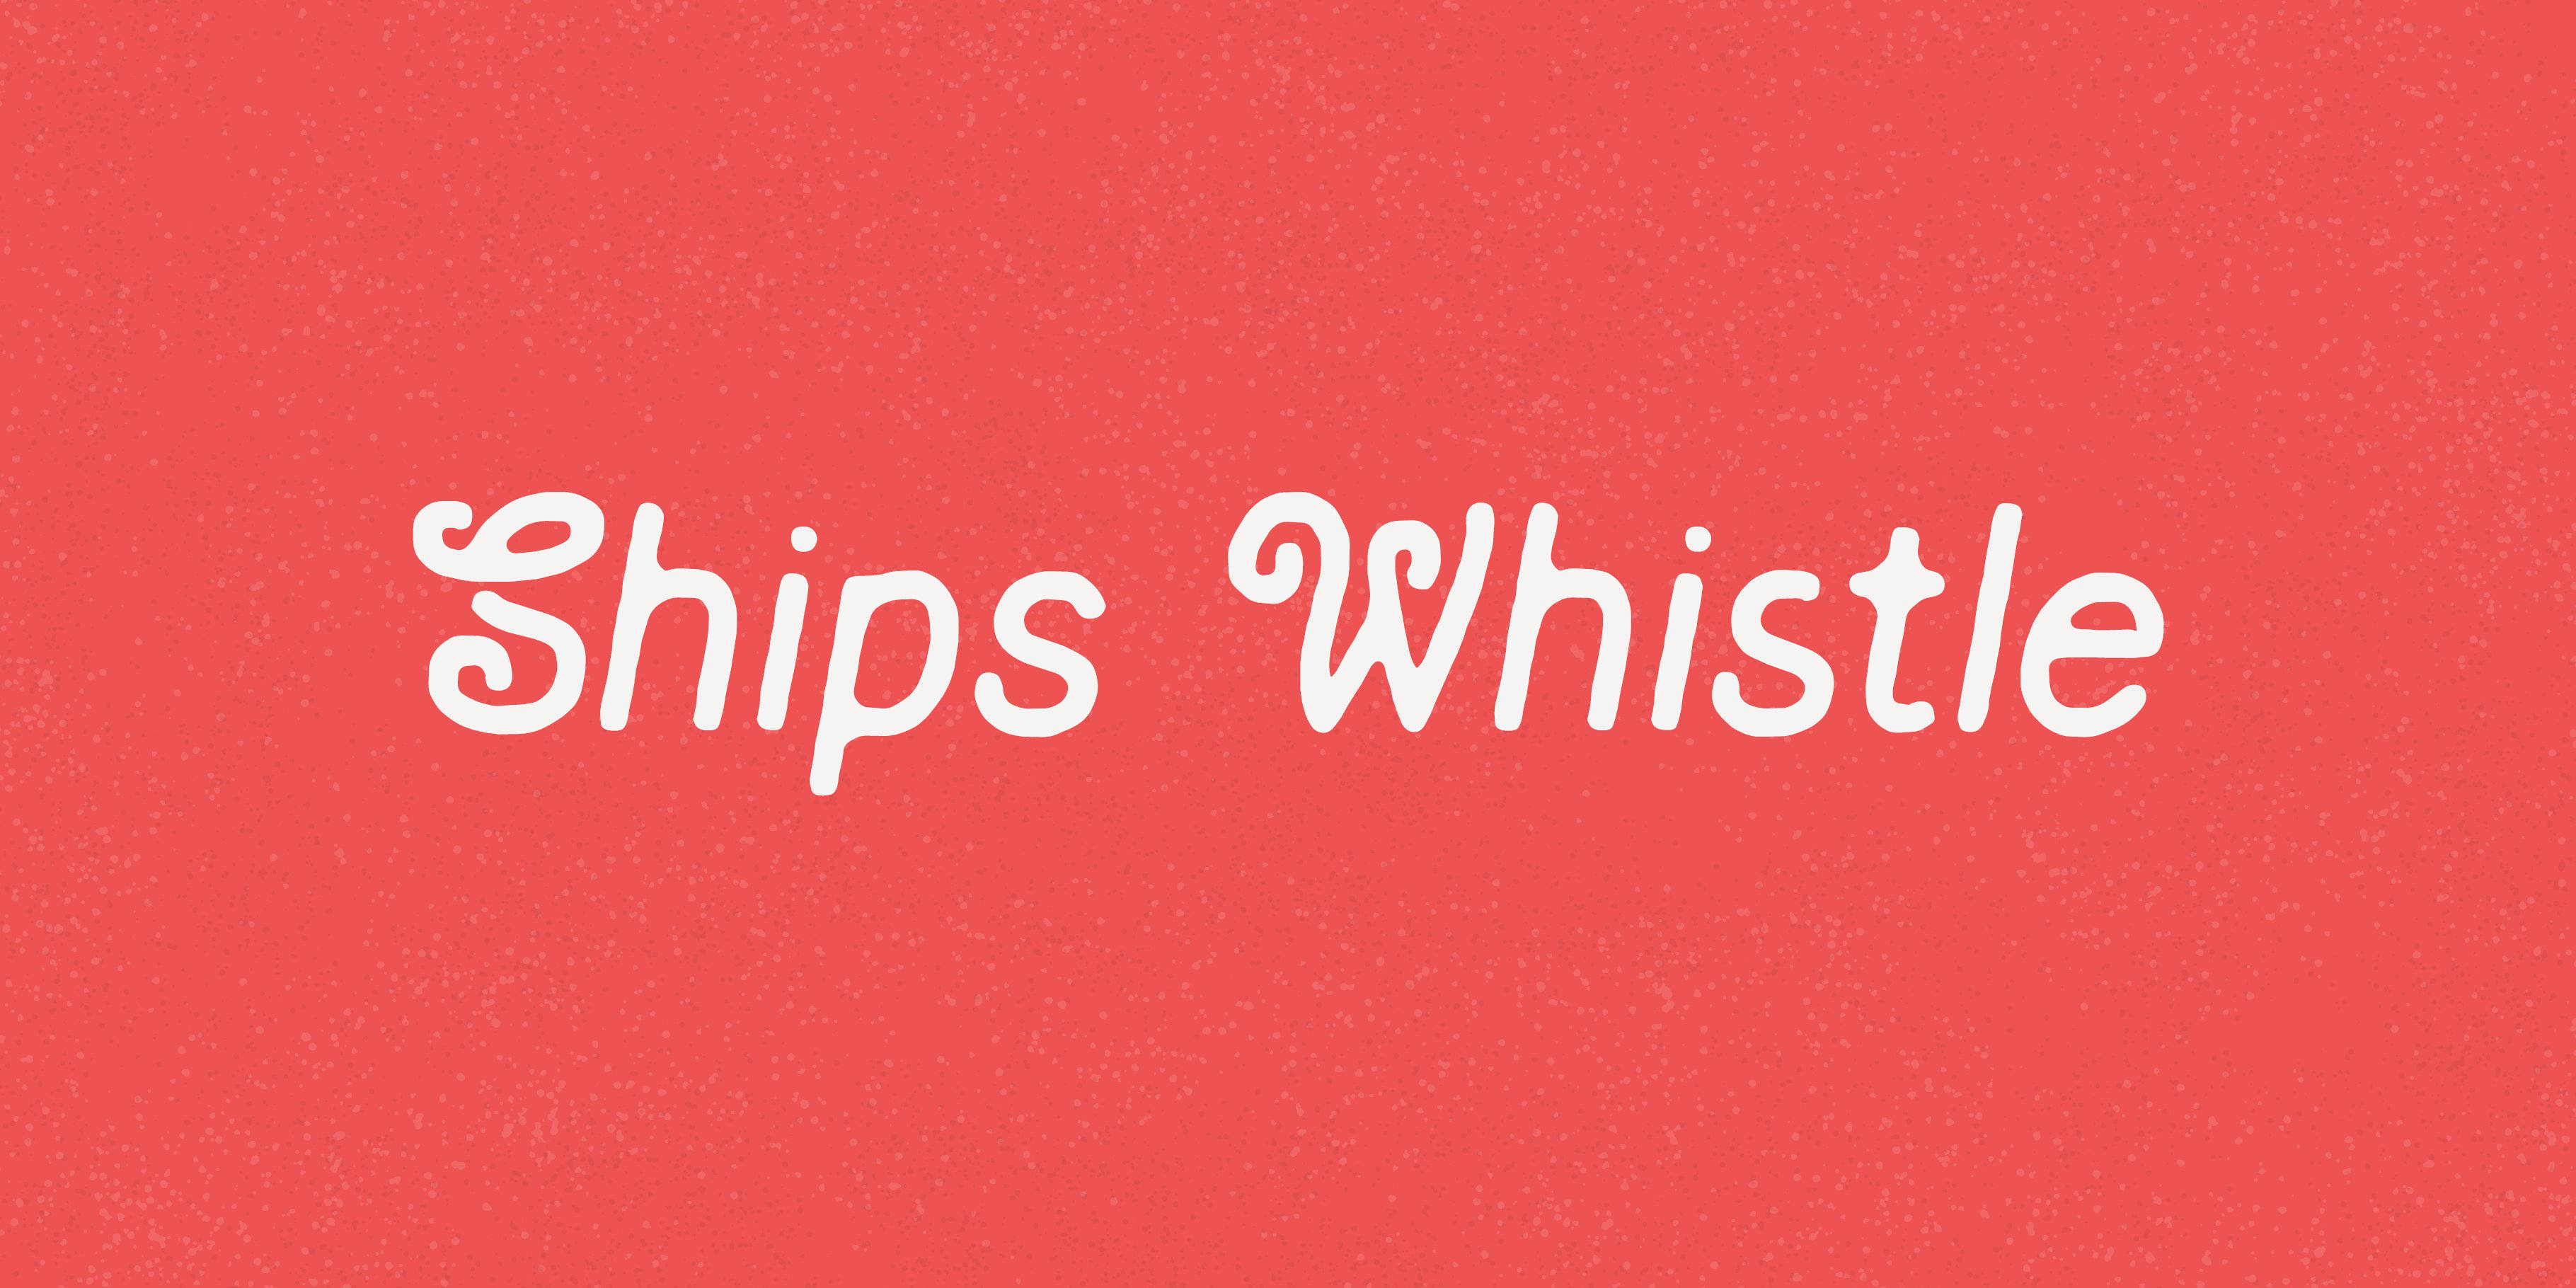 Ships Whistle Font